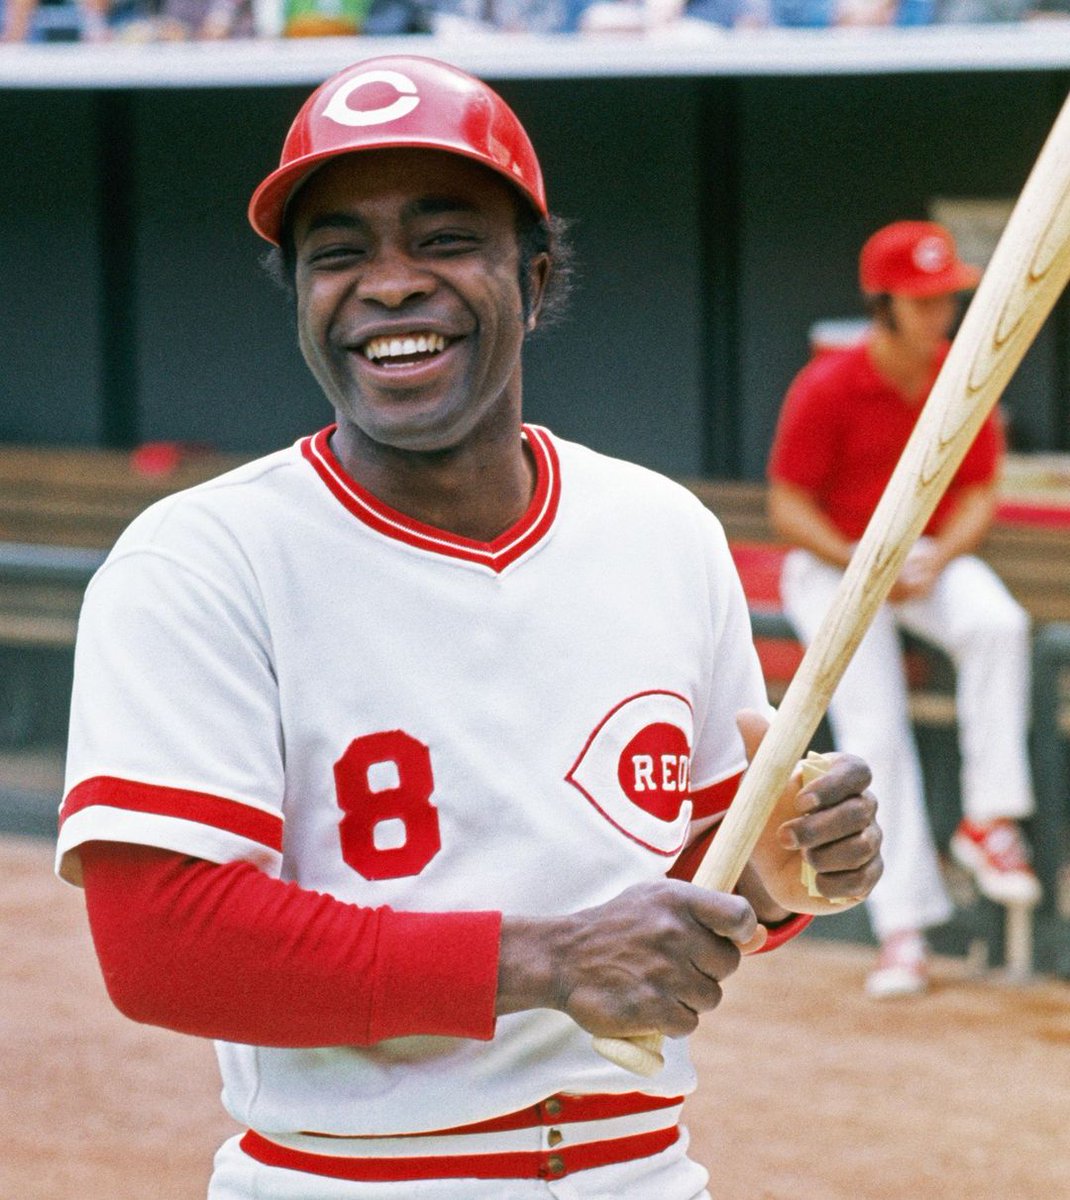 Old baseball manager adage is you always put your very best hitter third in the batting order. Joe Morgan batted third for the mighty Big Red Machine. The best hitter on the best team. What a player. #RIP #JoeMorgan